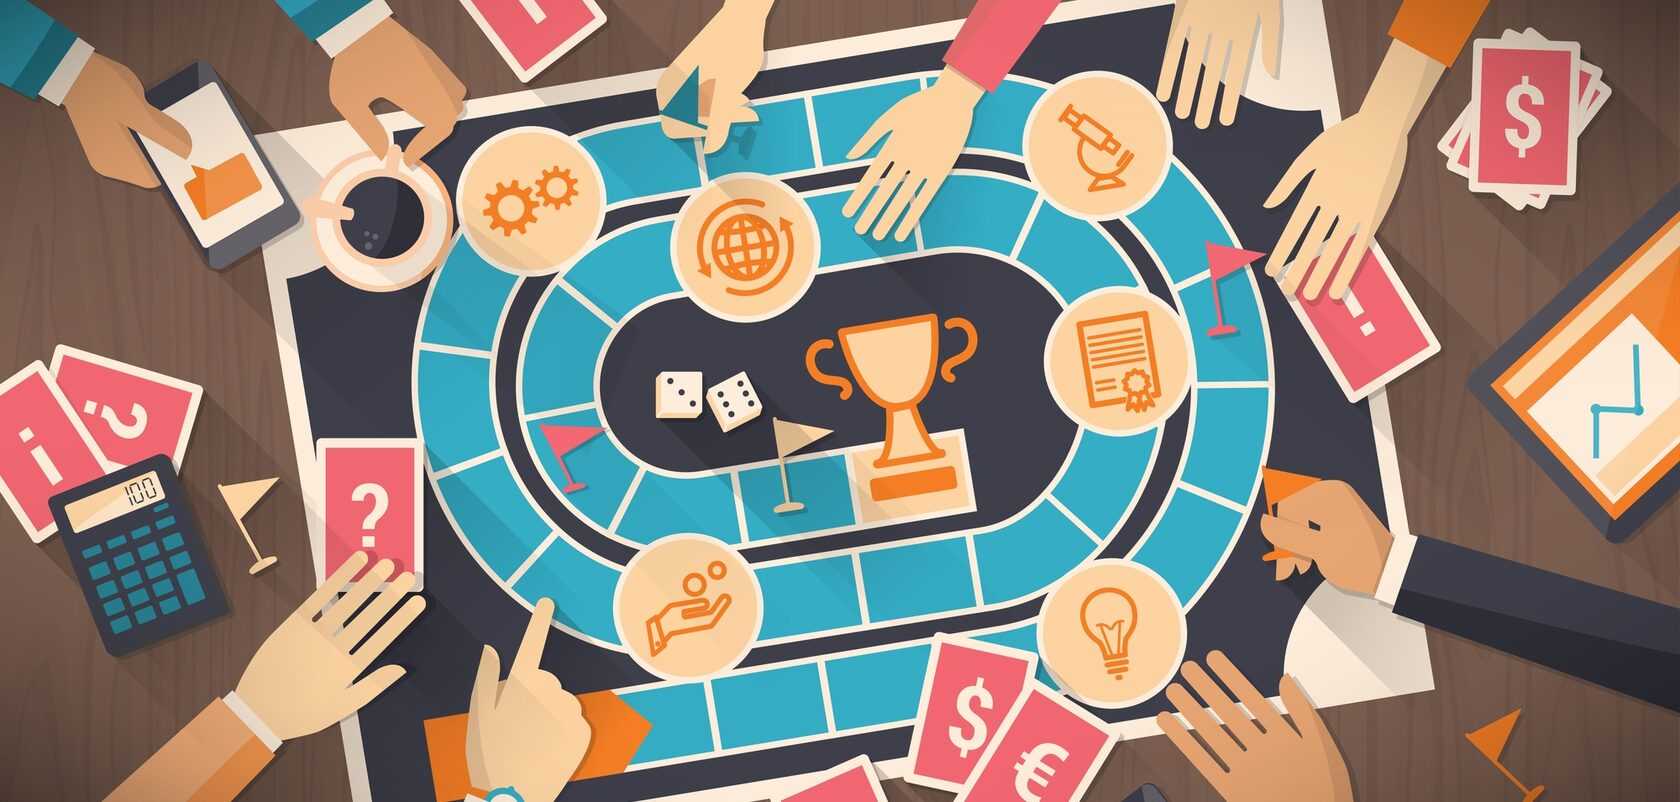 13 best gamification apps to improve your life